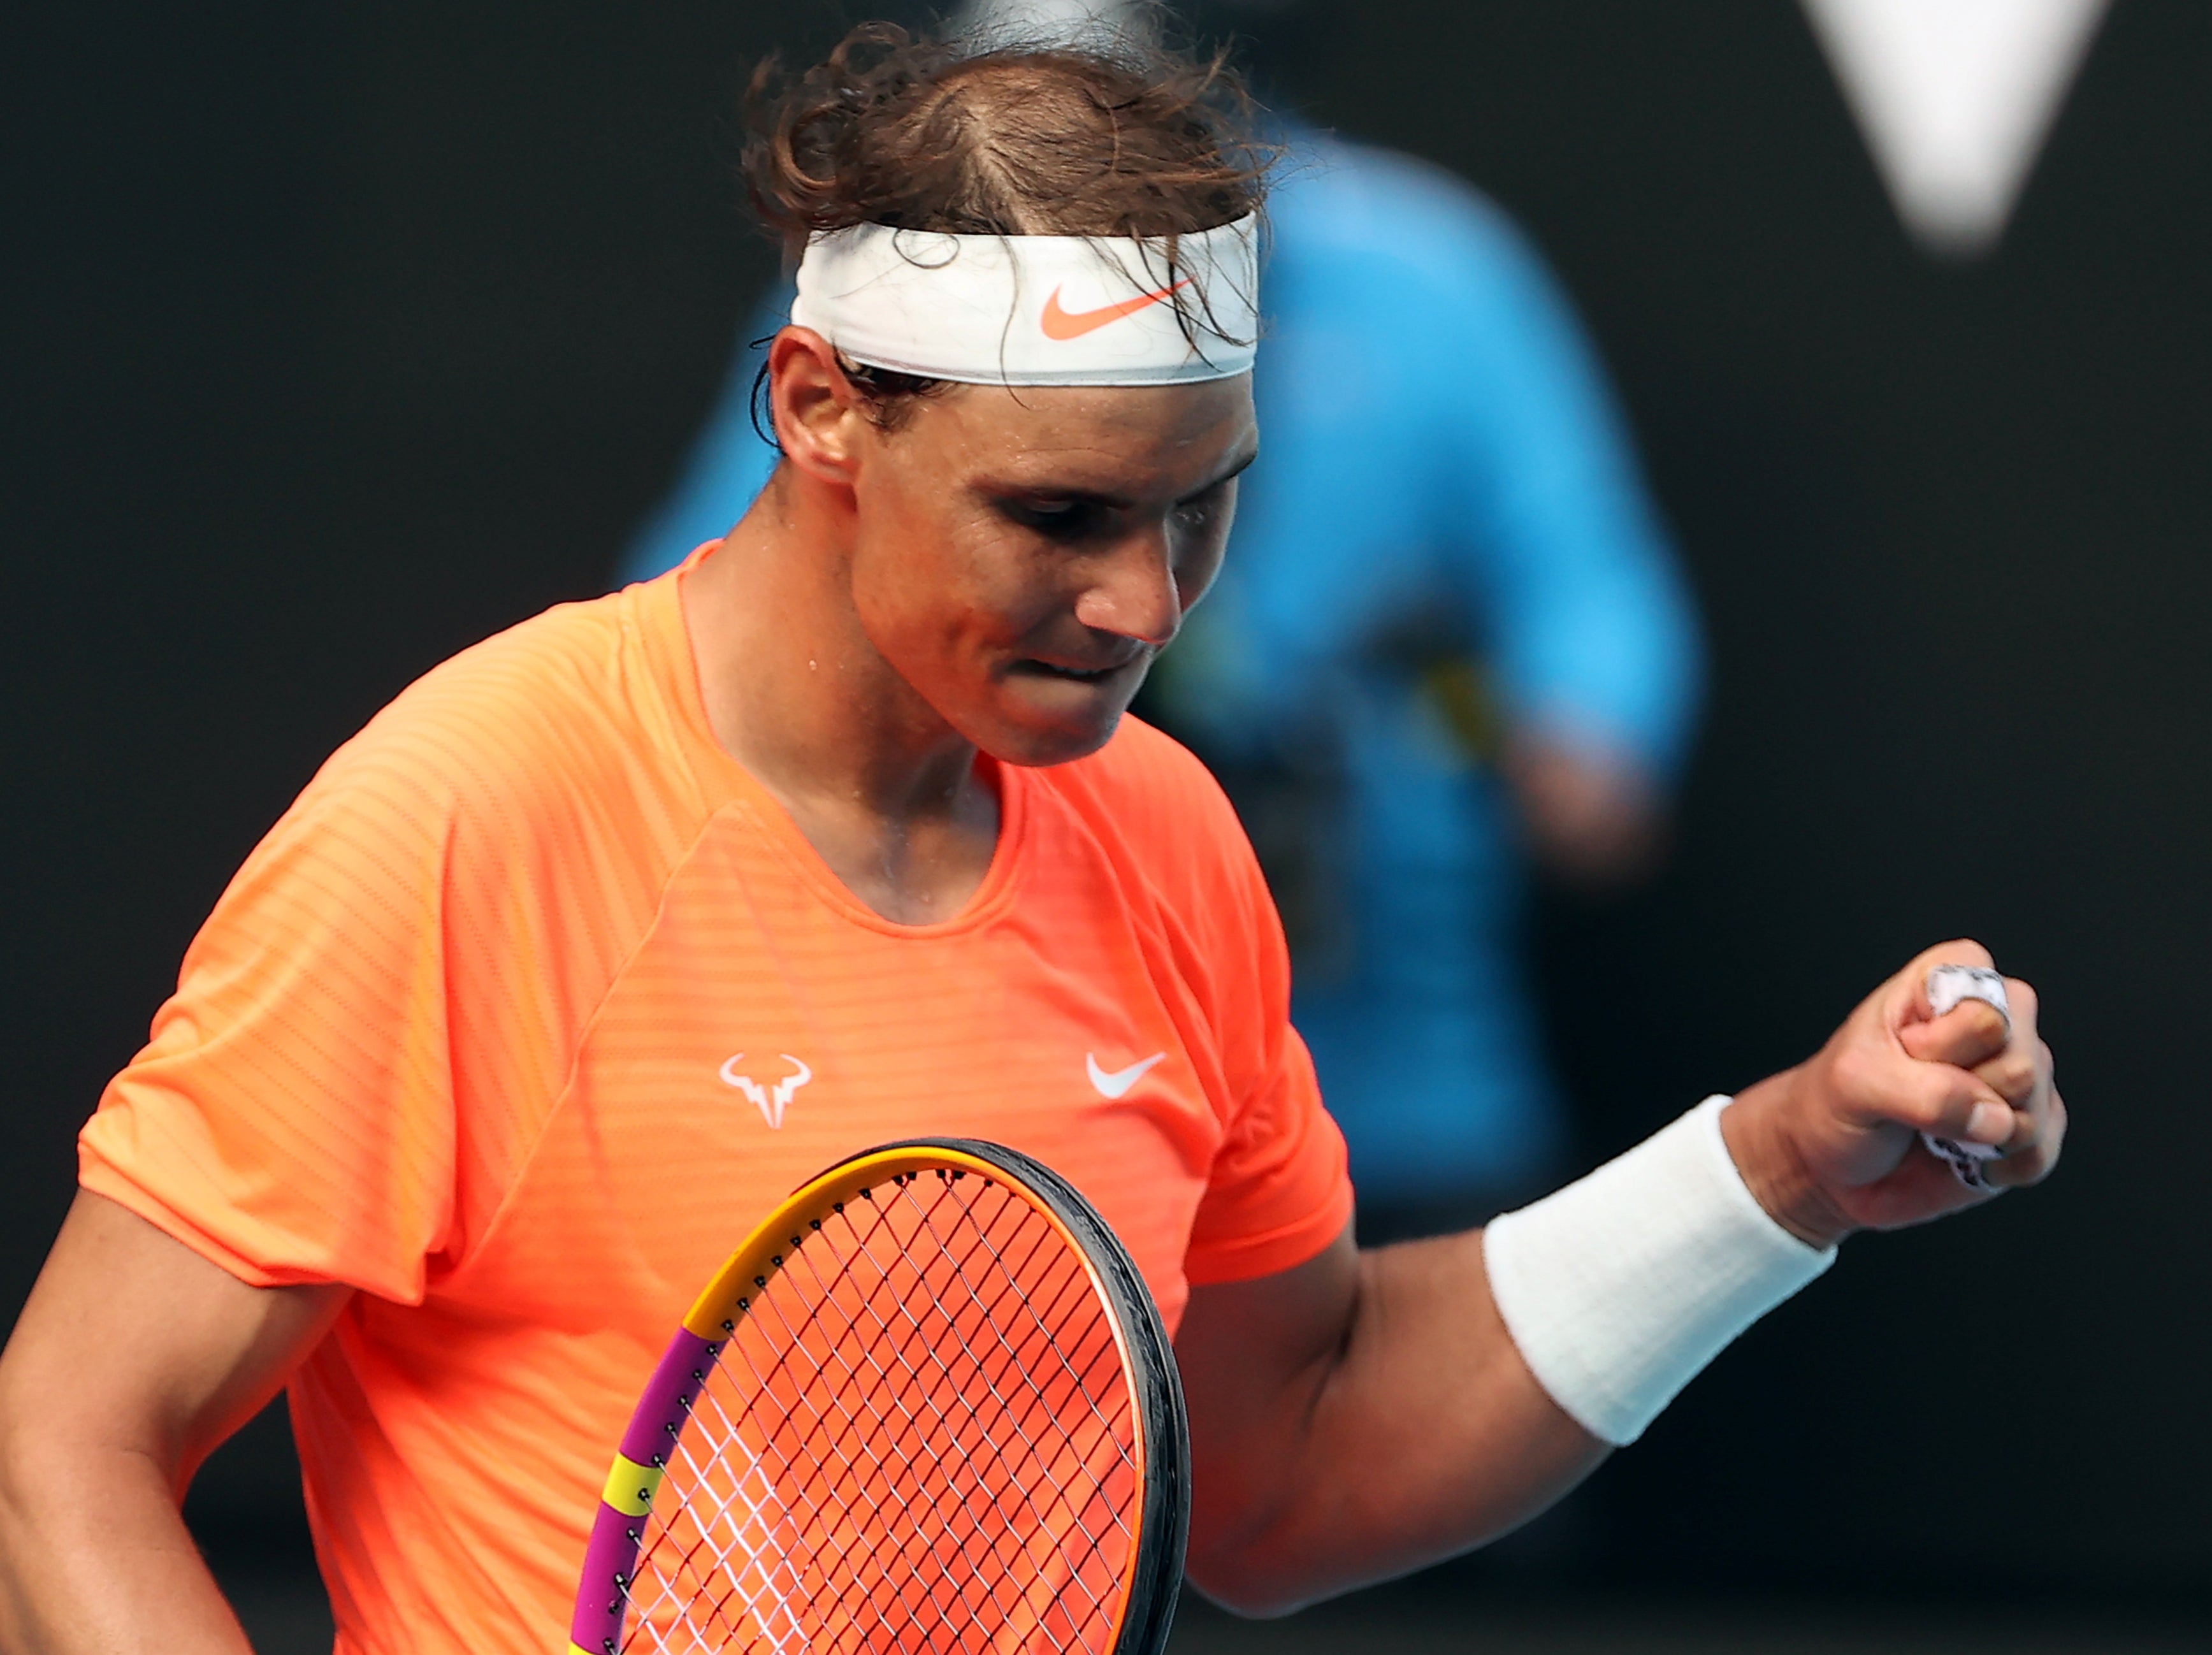 Australian Open 2021 Rafael Nadal sees off Fabio Fognini for spot in quarter-finals The Independent